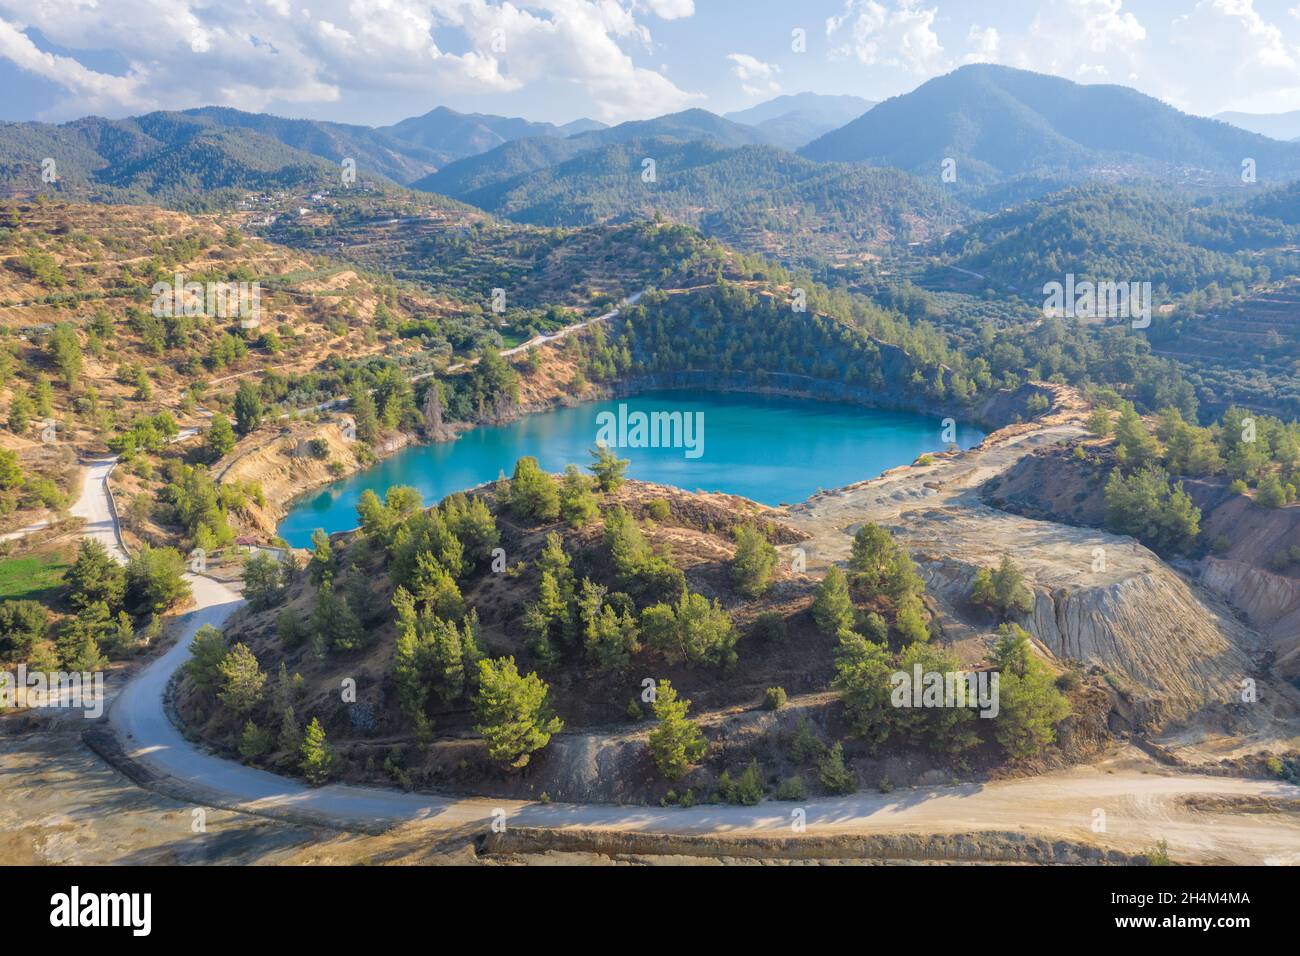 Memi lake in open pit of abandoned pyrite mine in Xyliatos, Cyprus. Ecological restoration and reforestation of old mining area Stock Photo